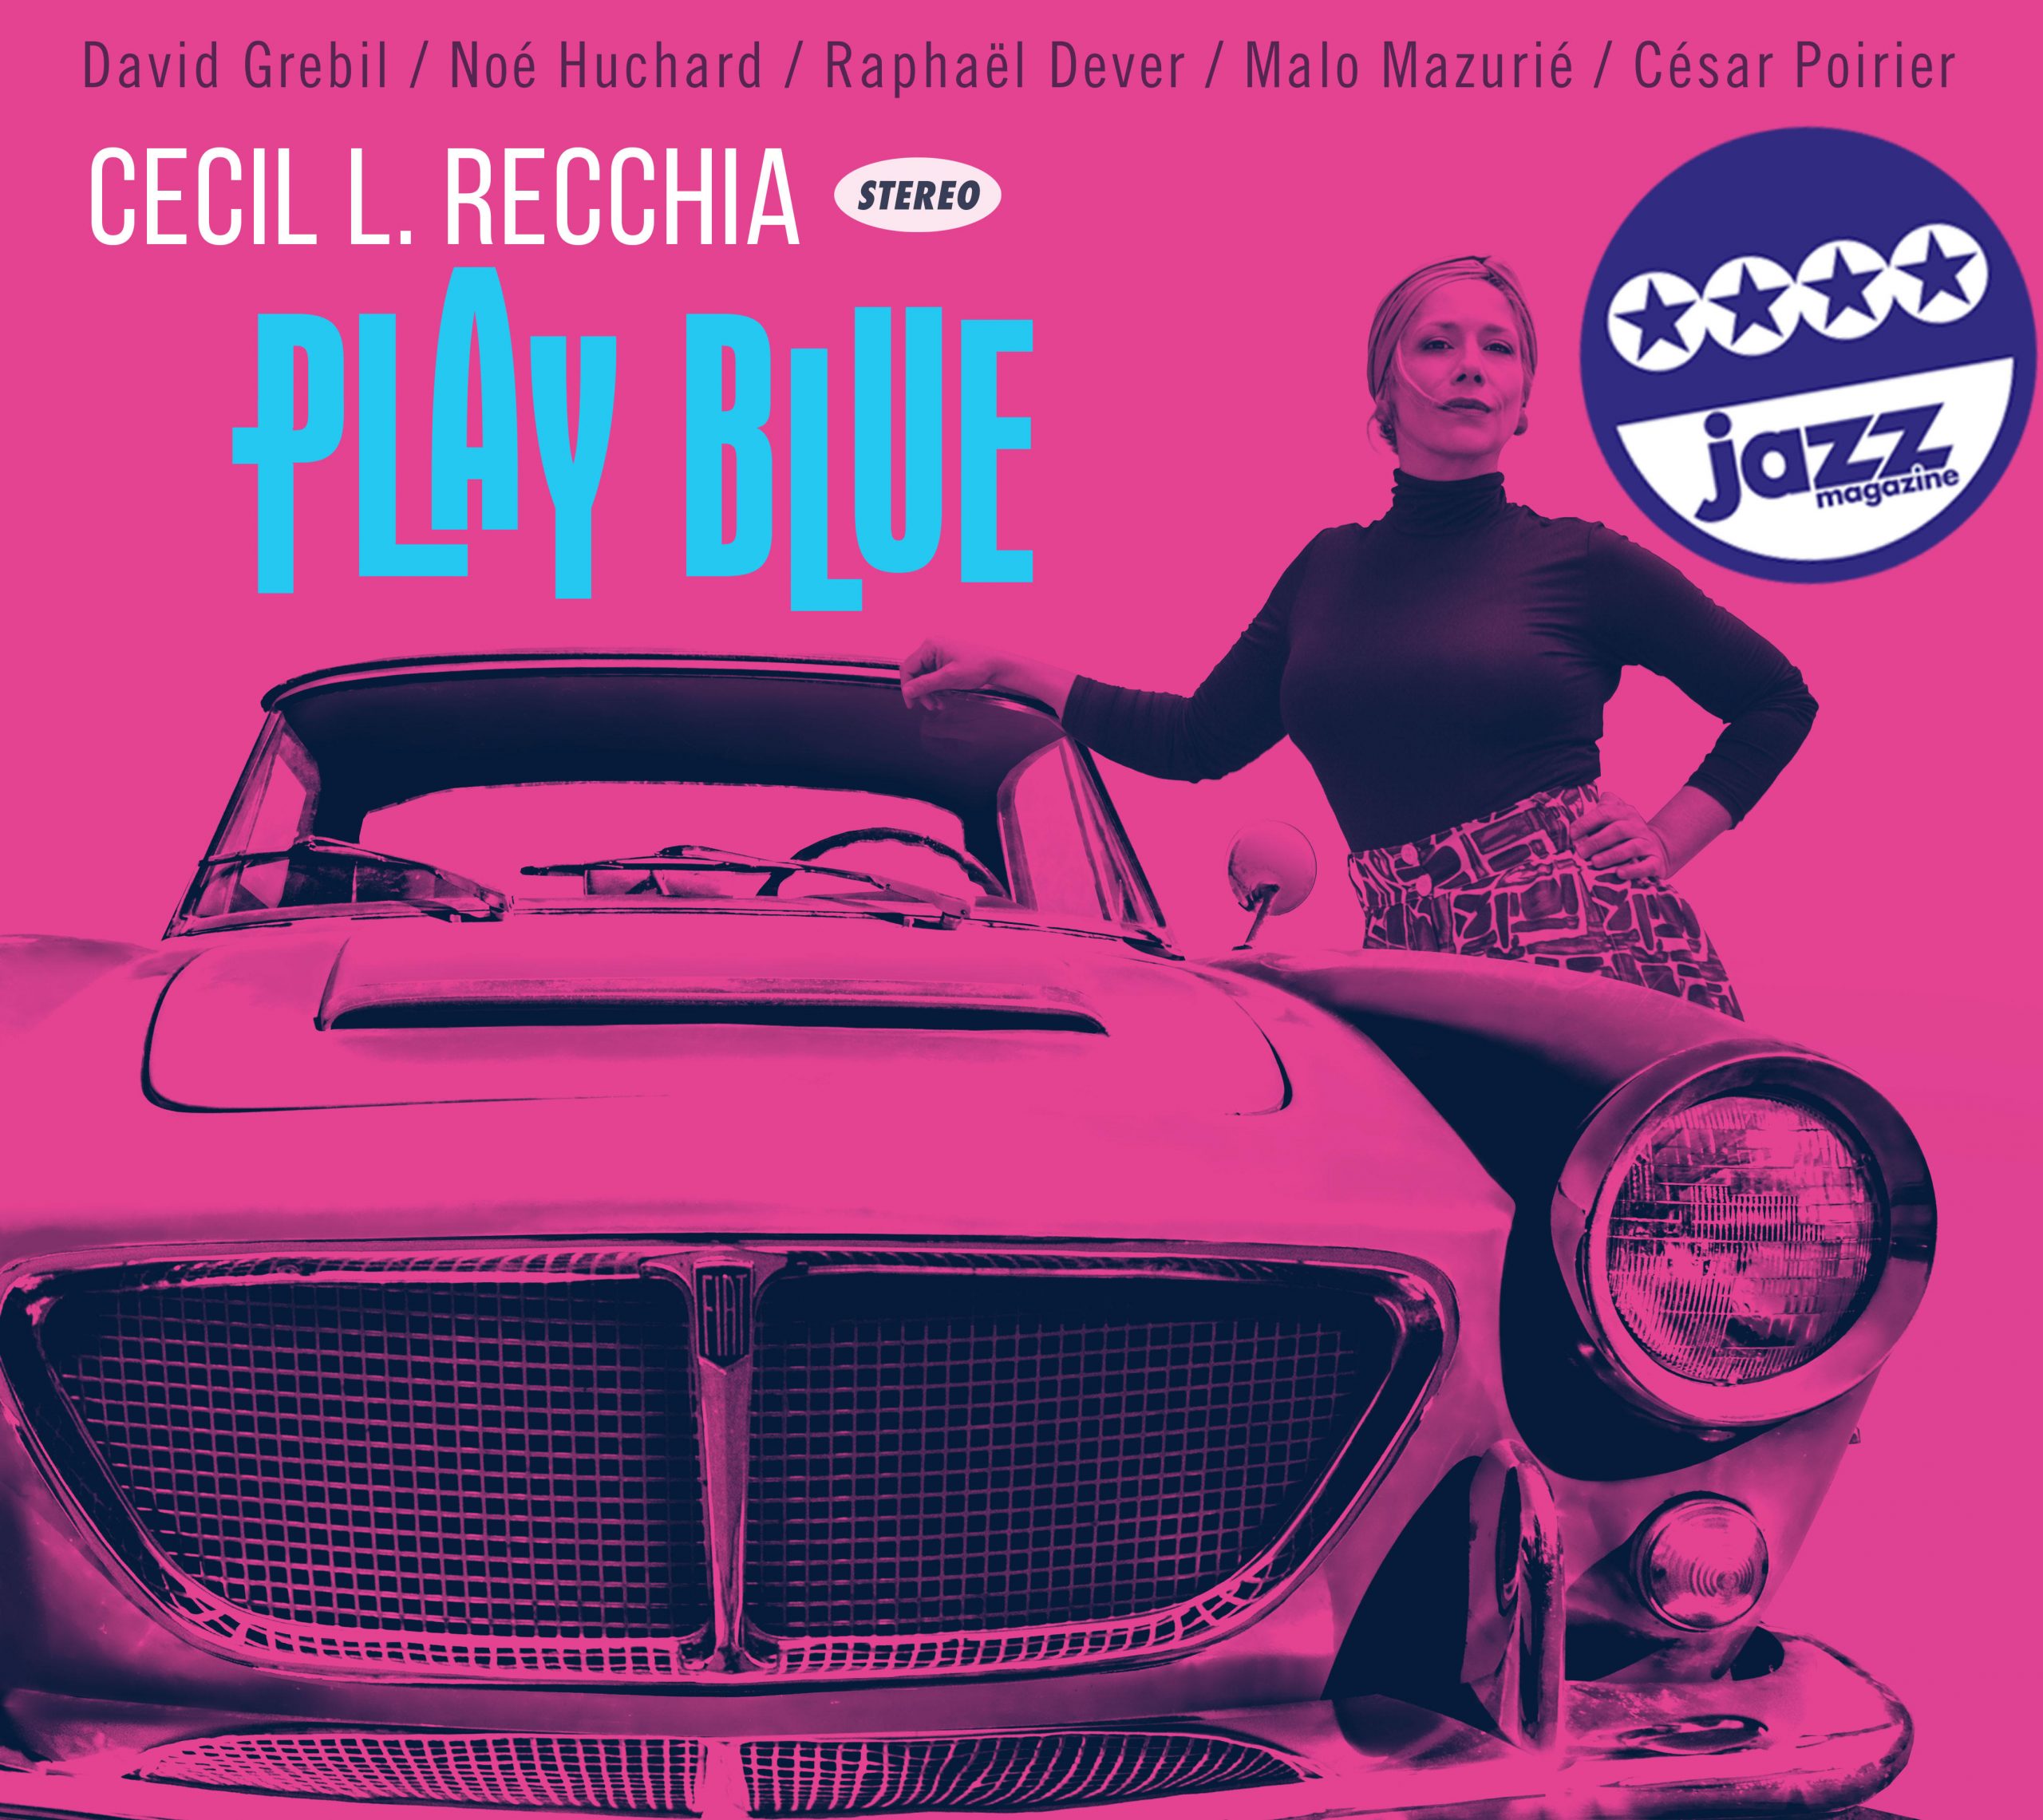 Couverture CD Play Blue Cecil L Recchia and the Gumbo 4étoiles jazzmag